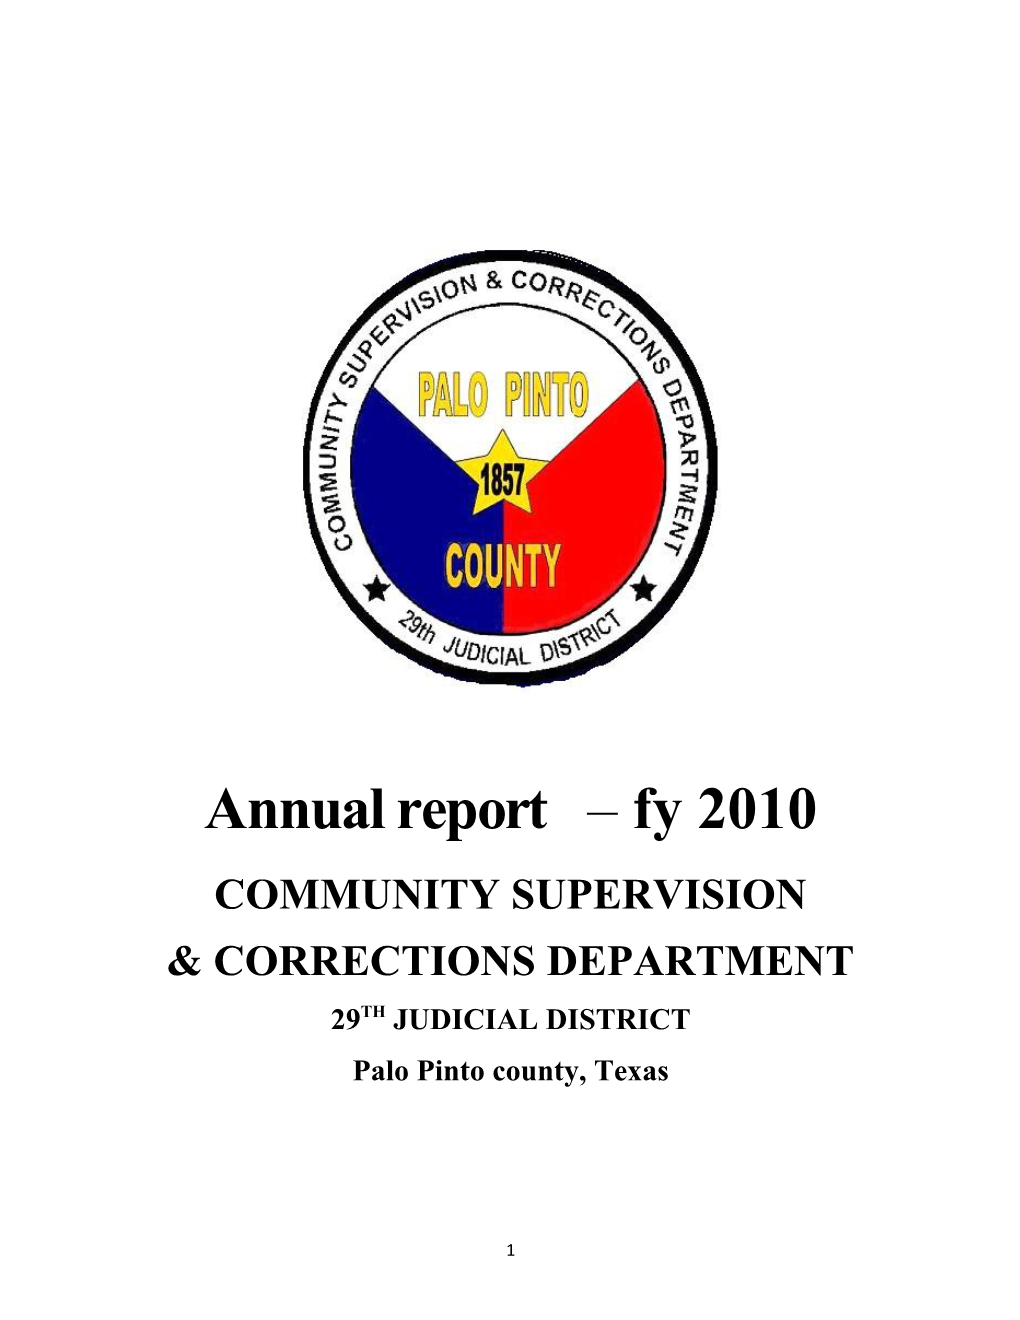 Annual Report Fy 2010